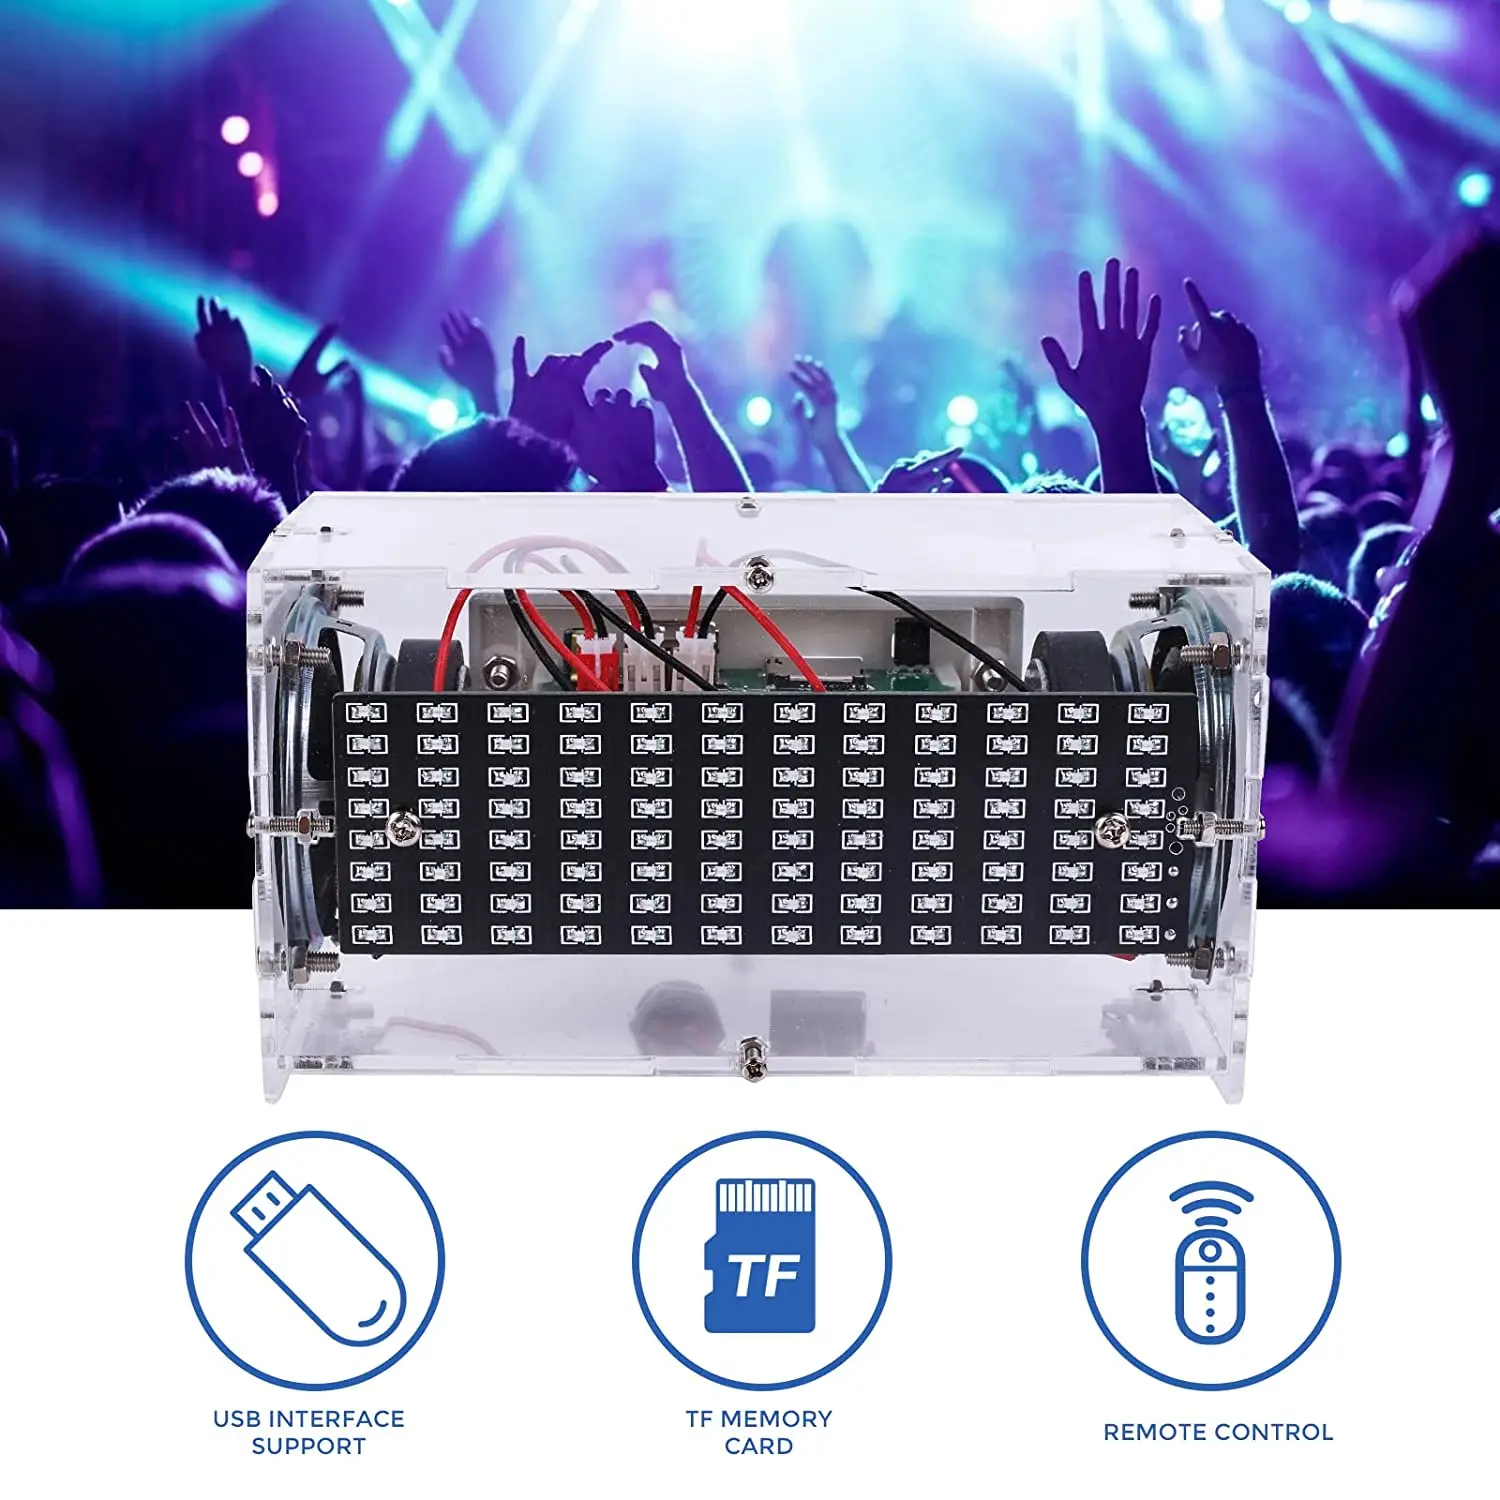 DIY Bluetooth Audio Stereo Speaker Kit 2*3W 12 Channels LED Flashing Music Spectrum USB TF 4ohm Sound Amplifier Remote Control images - 6